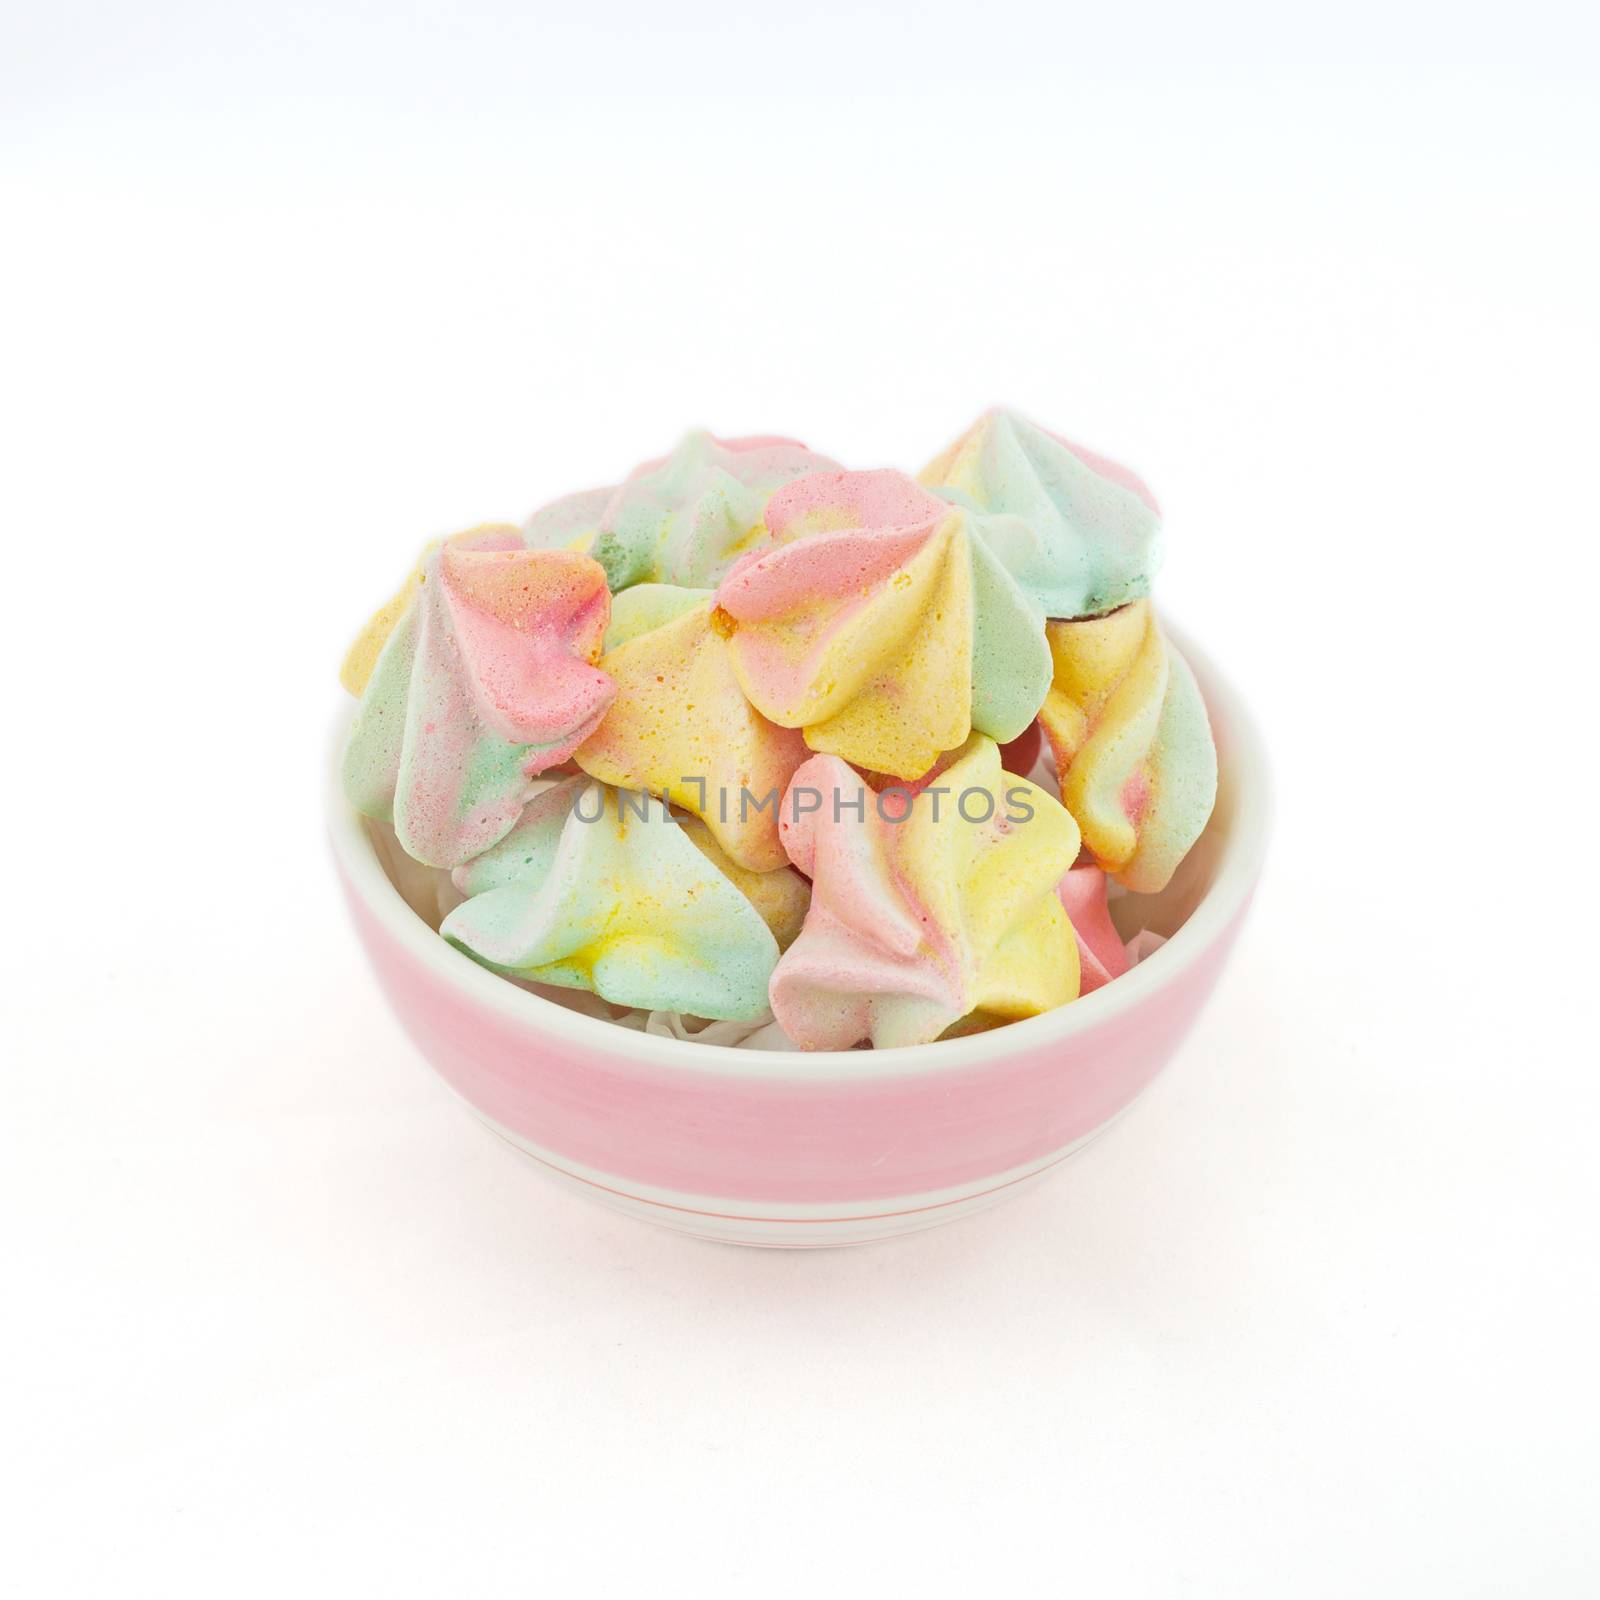 French rainbow meringue cookies on white background with copy space. Macro with shallow dof.